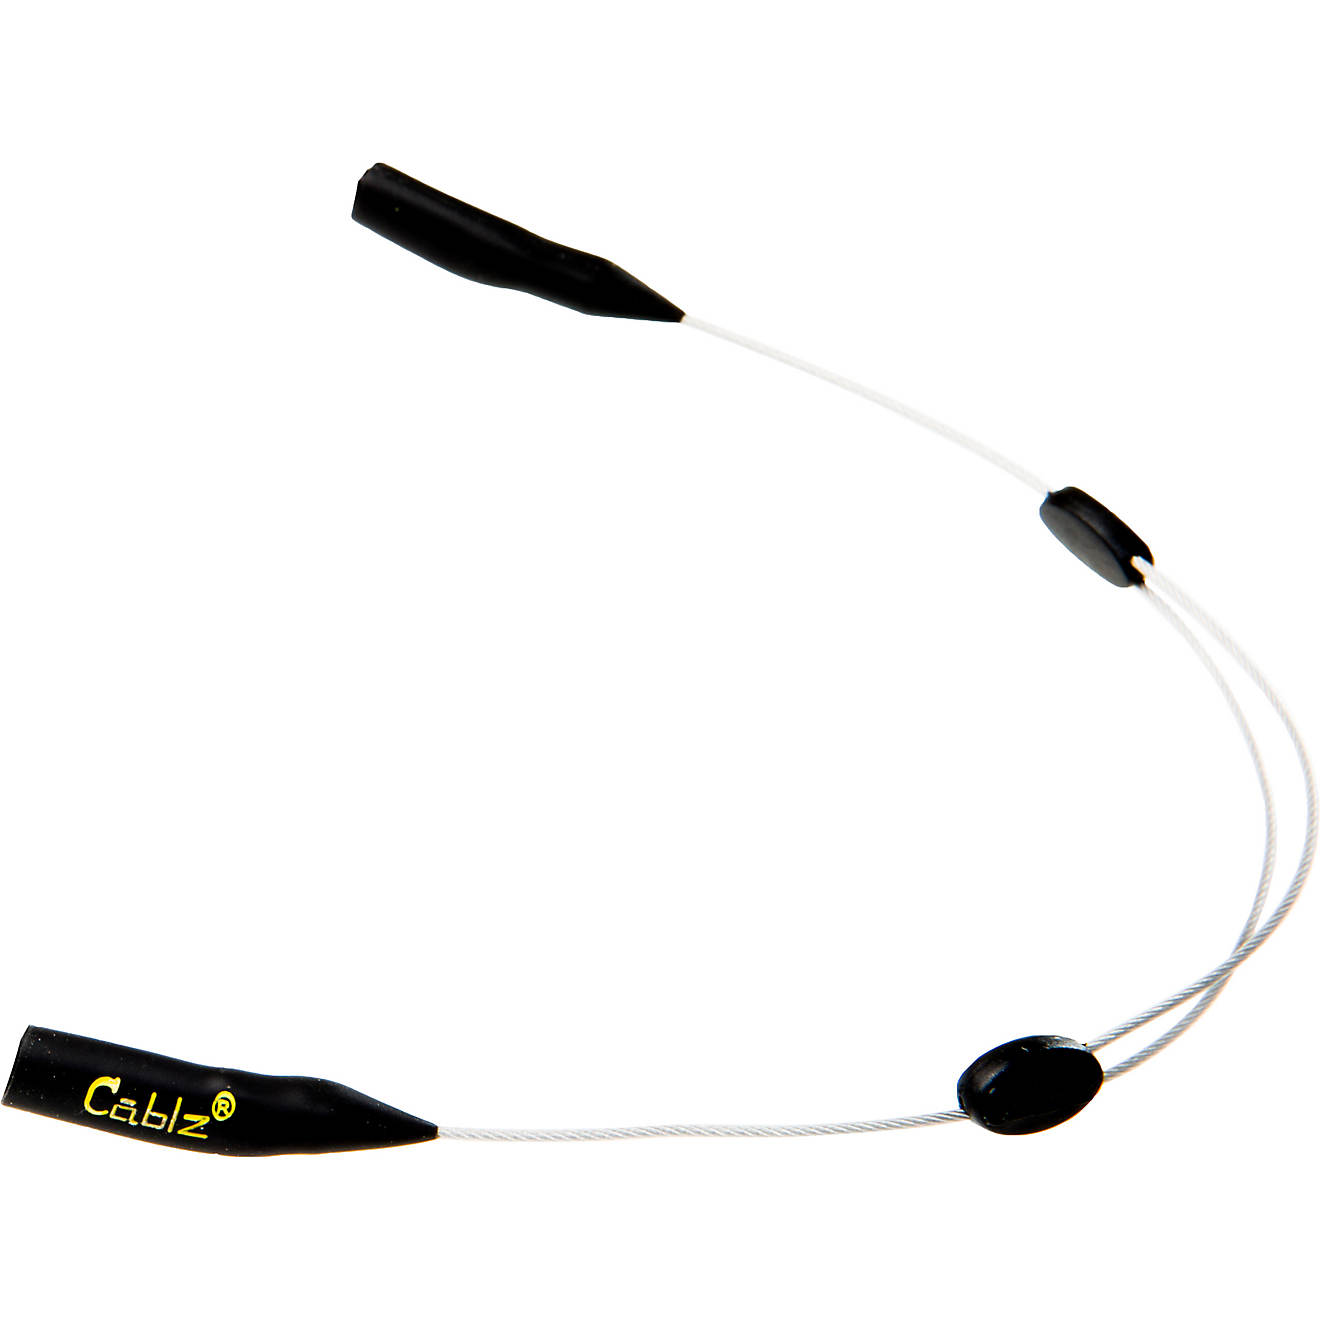 Cablz Colorz Zipz Adjustable Eyewear Retainer Coated Stainless 14 Inch Lightweight Low Profile 